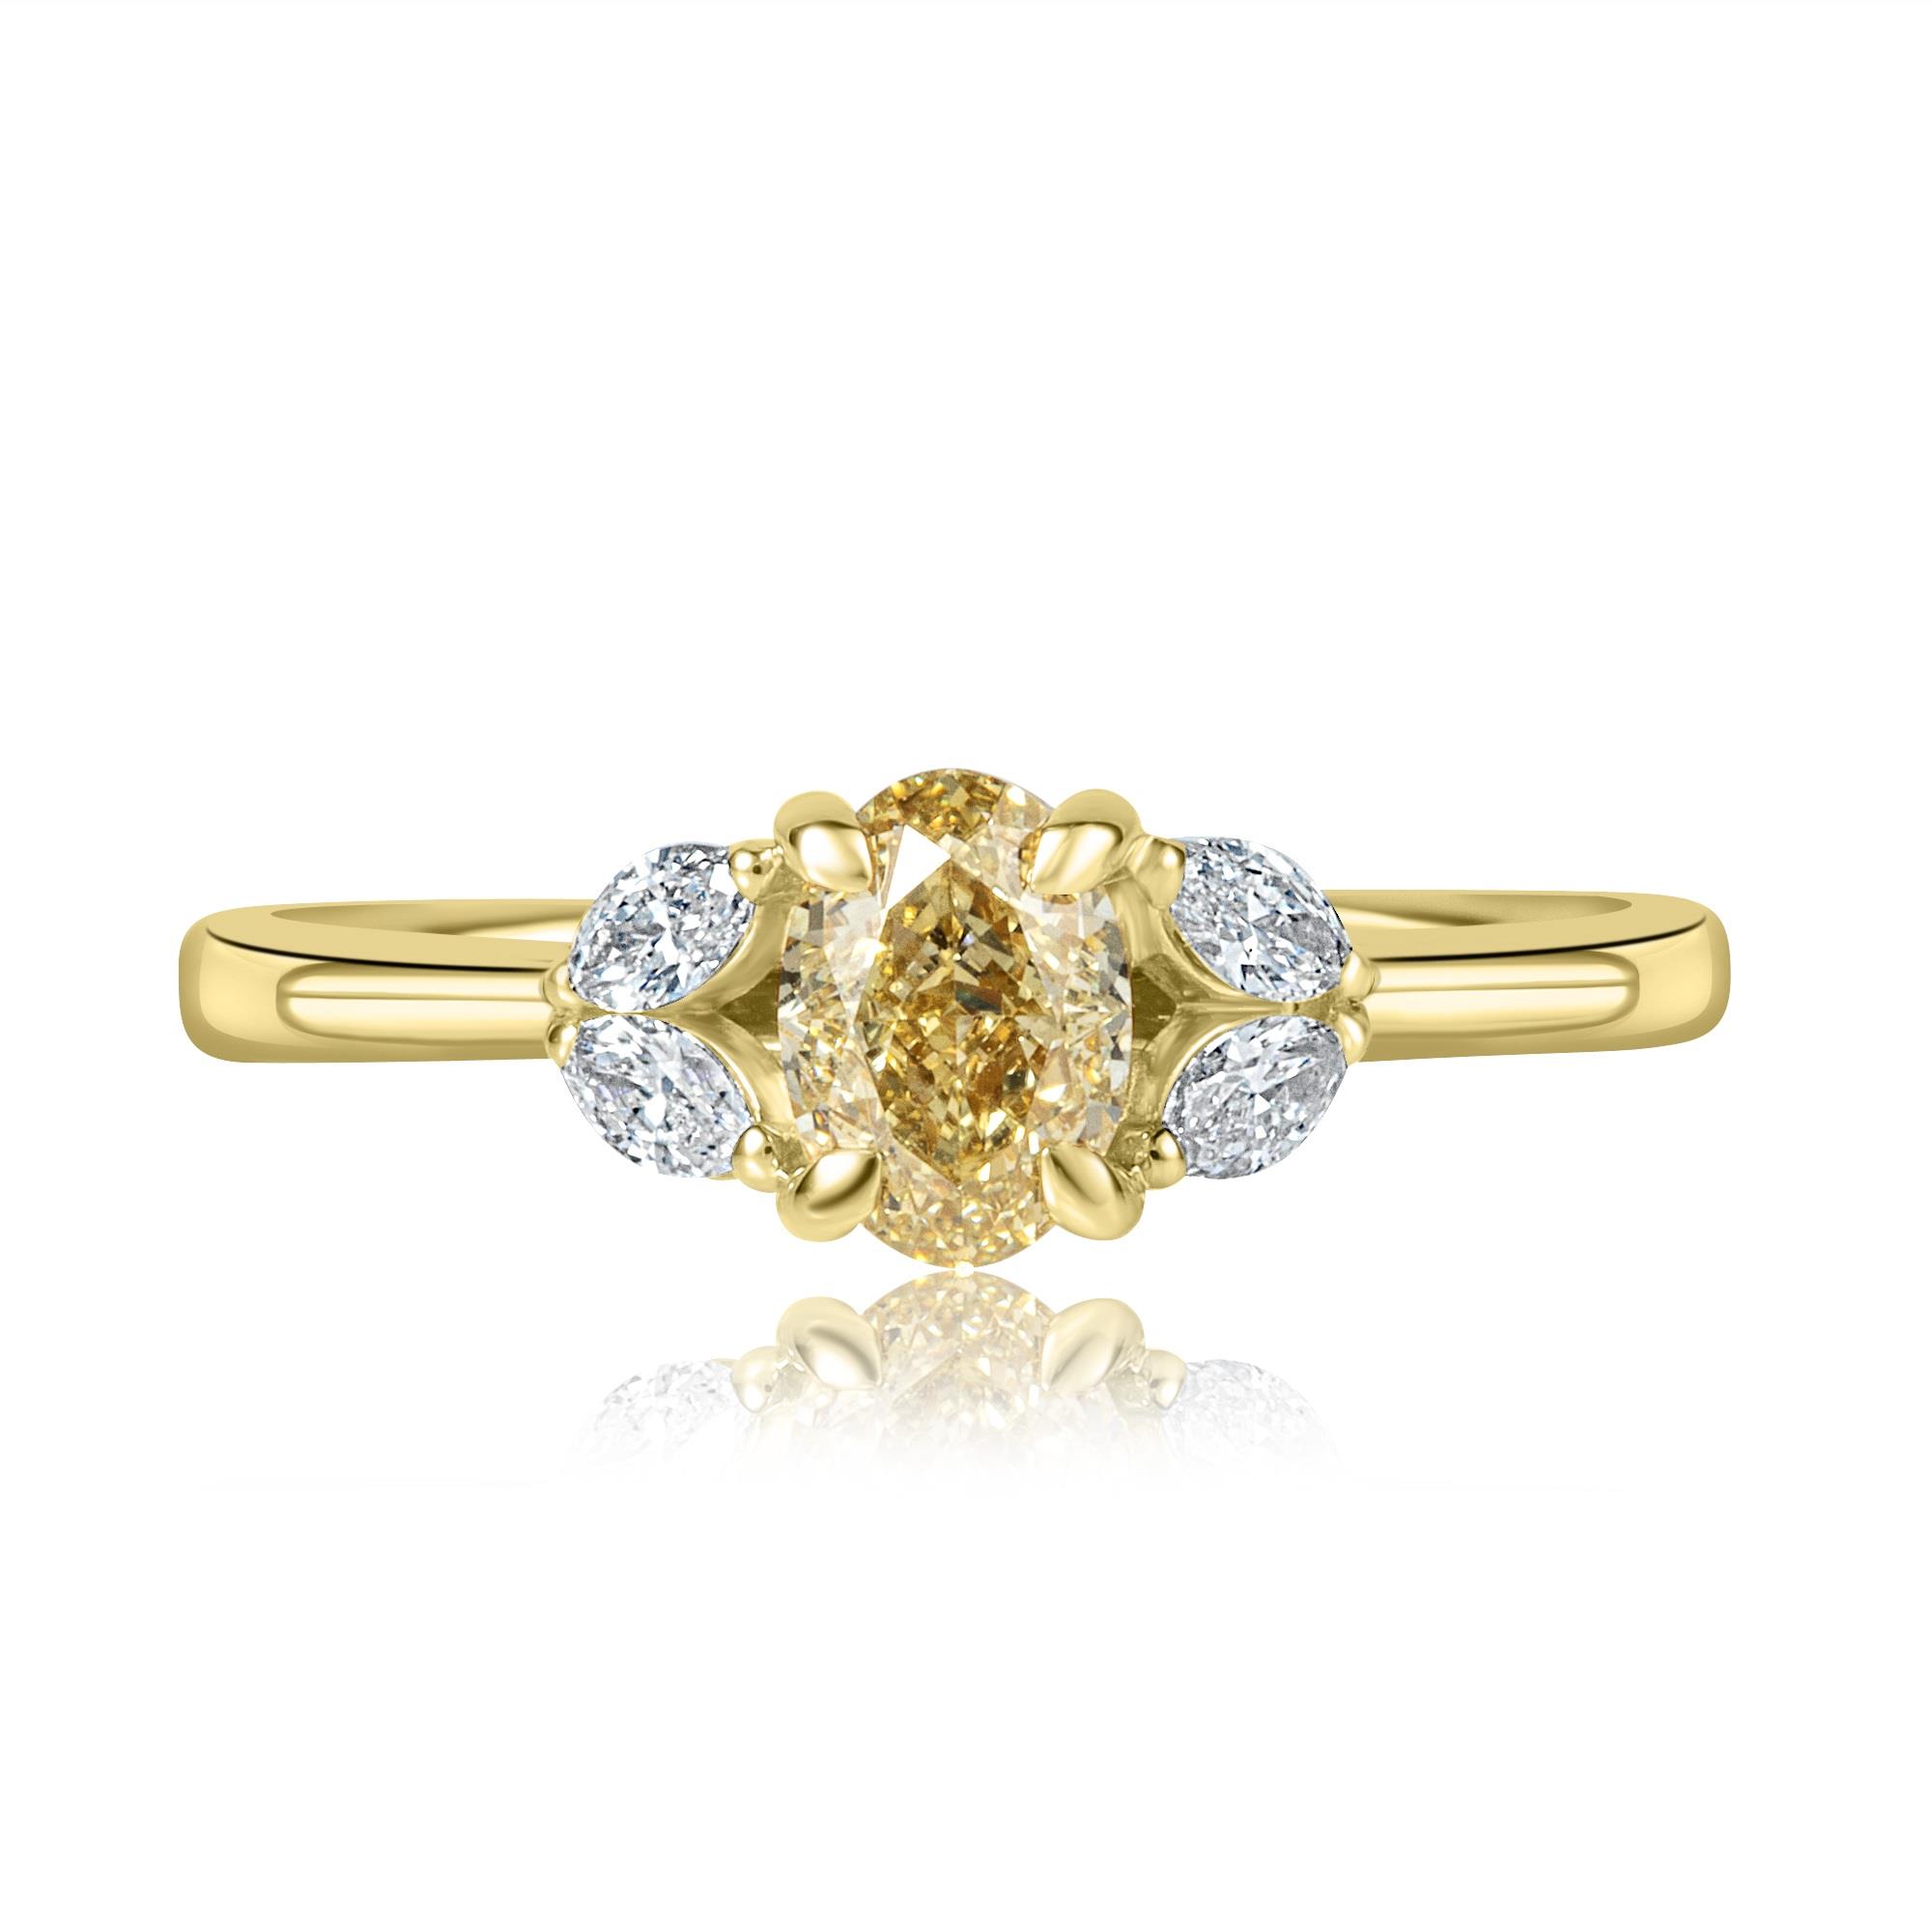 18ct Yellow Gold Diamond Ring With 1 Carat Oval Champagne